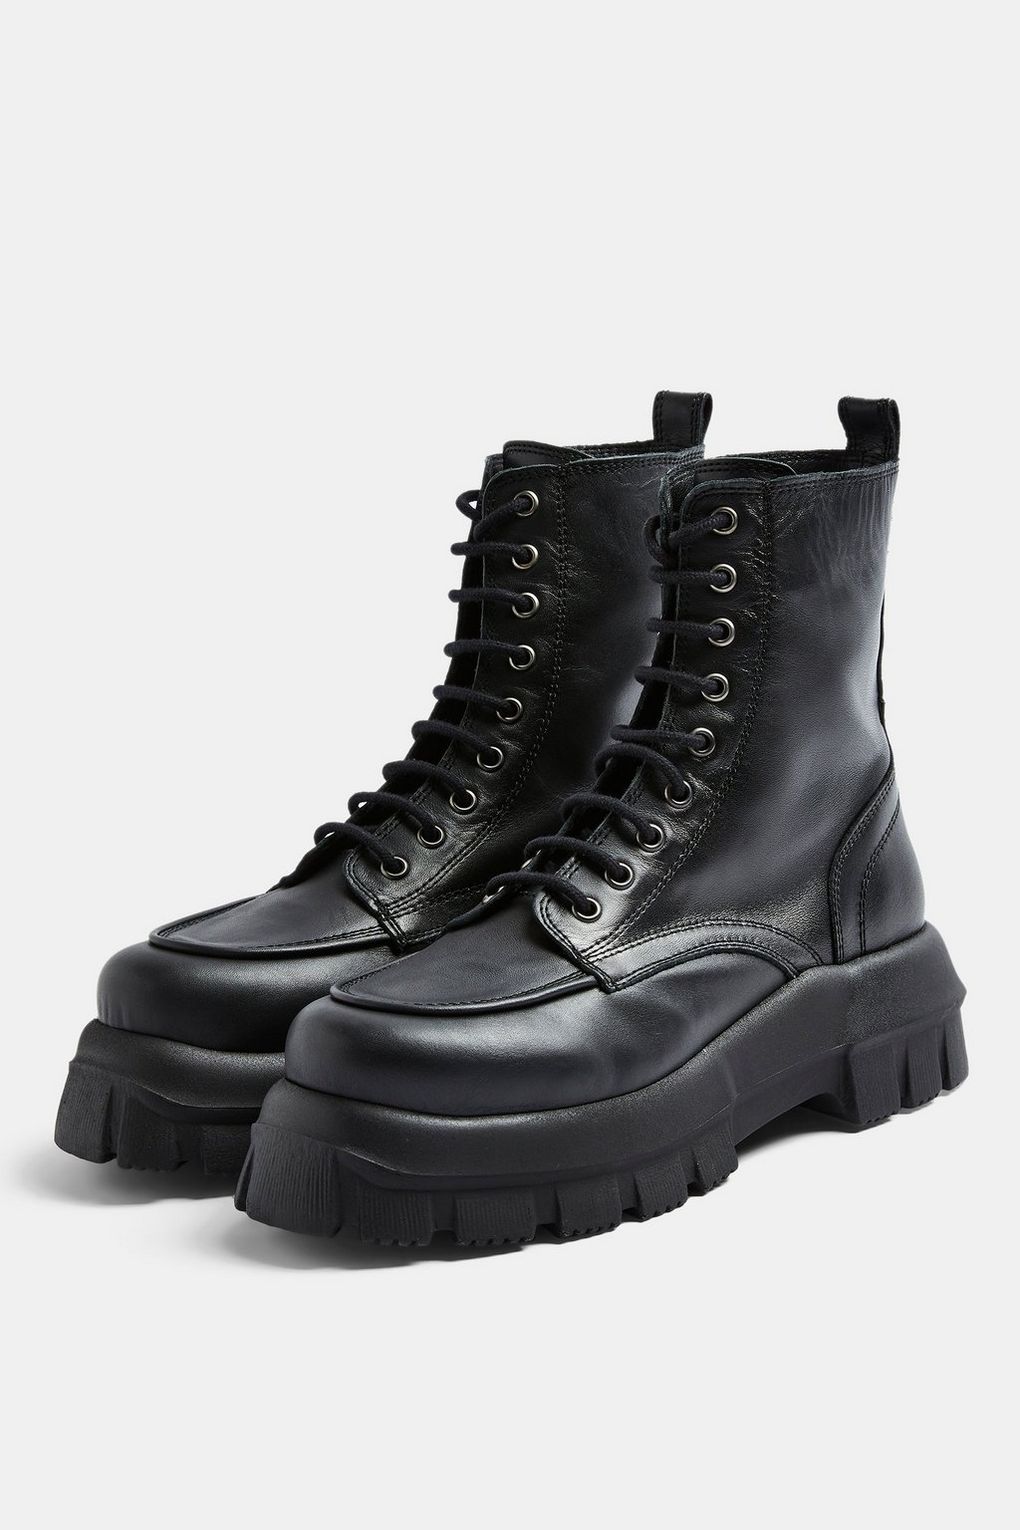 Topshop + Ava Chunky Lace Up Boots